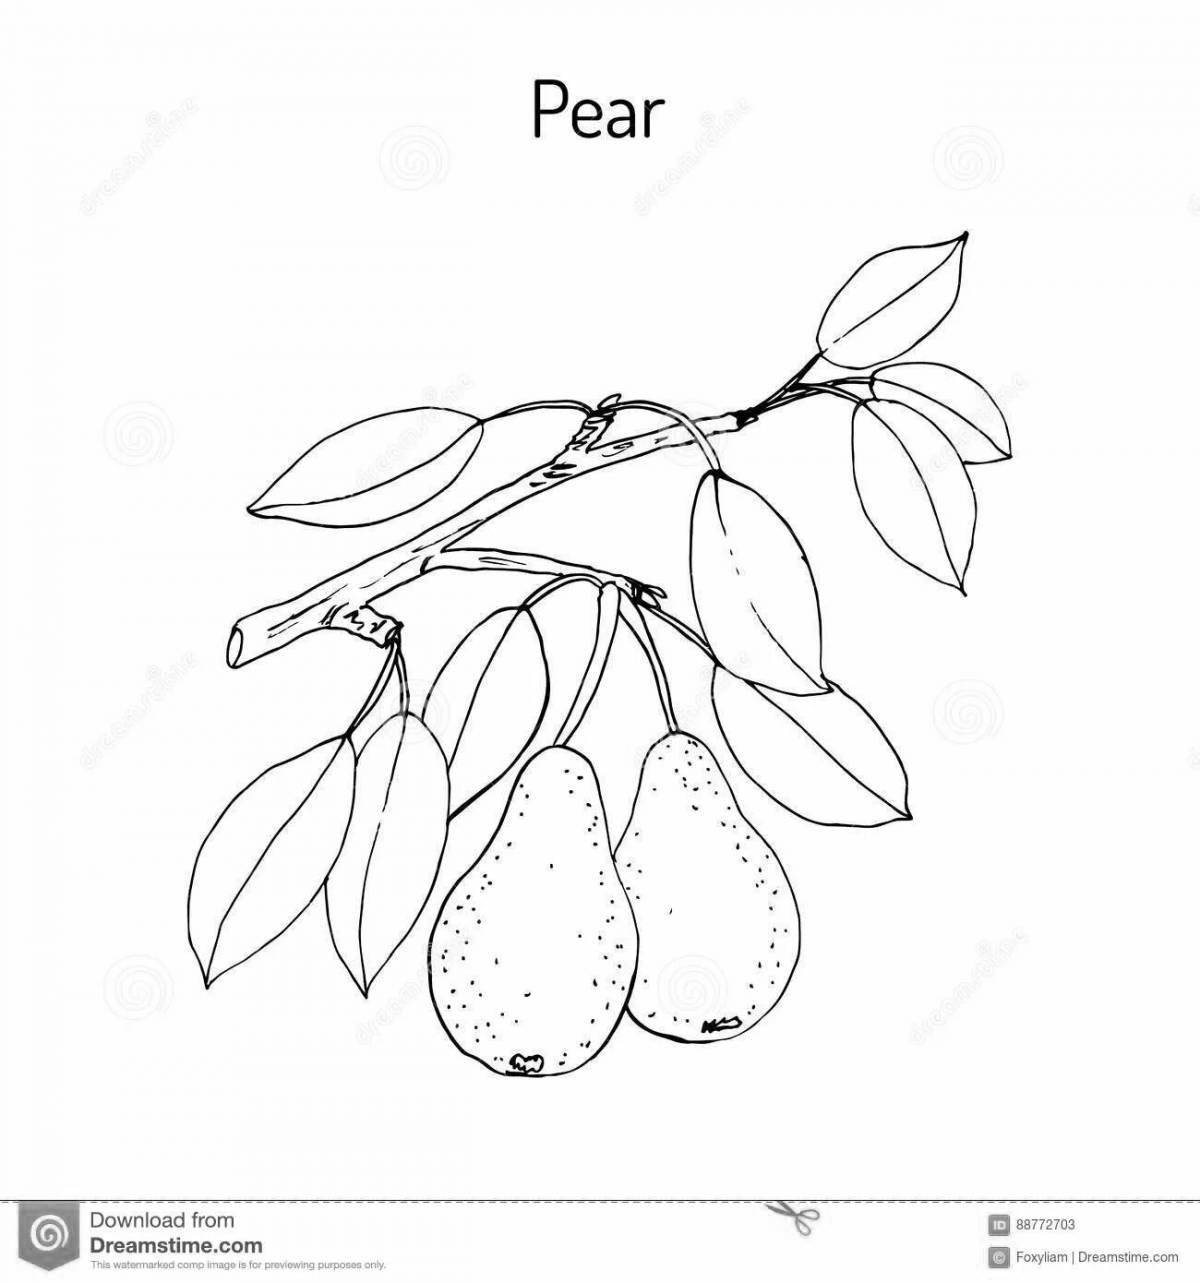 Coloring page enthusiastic pear tree